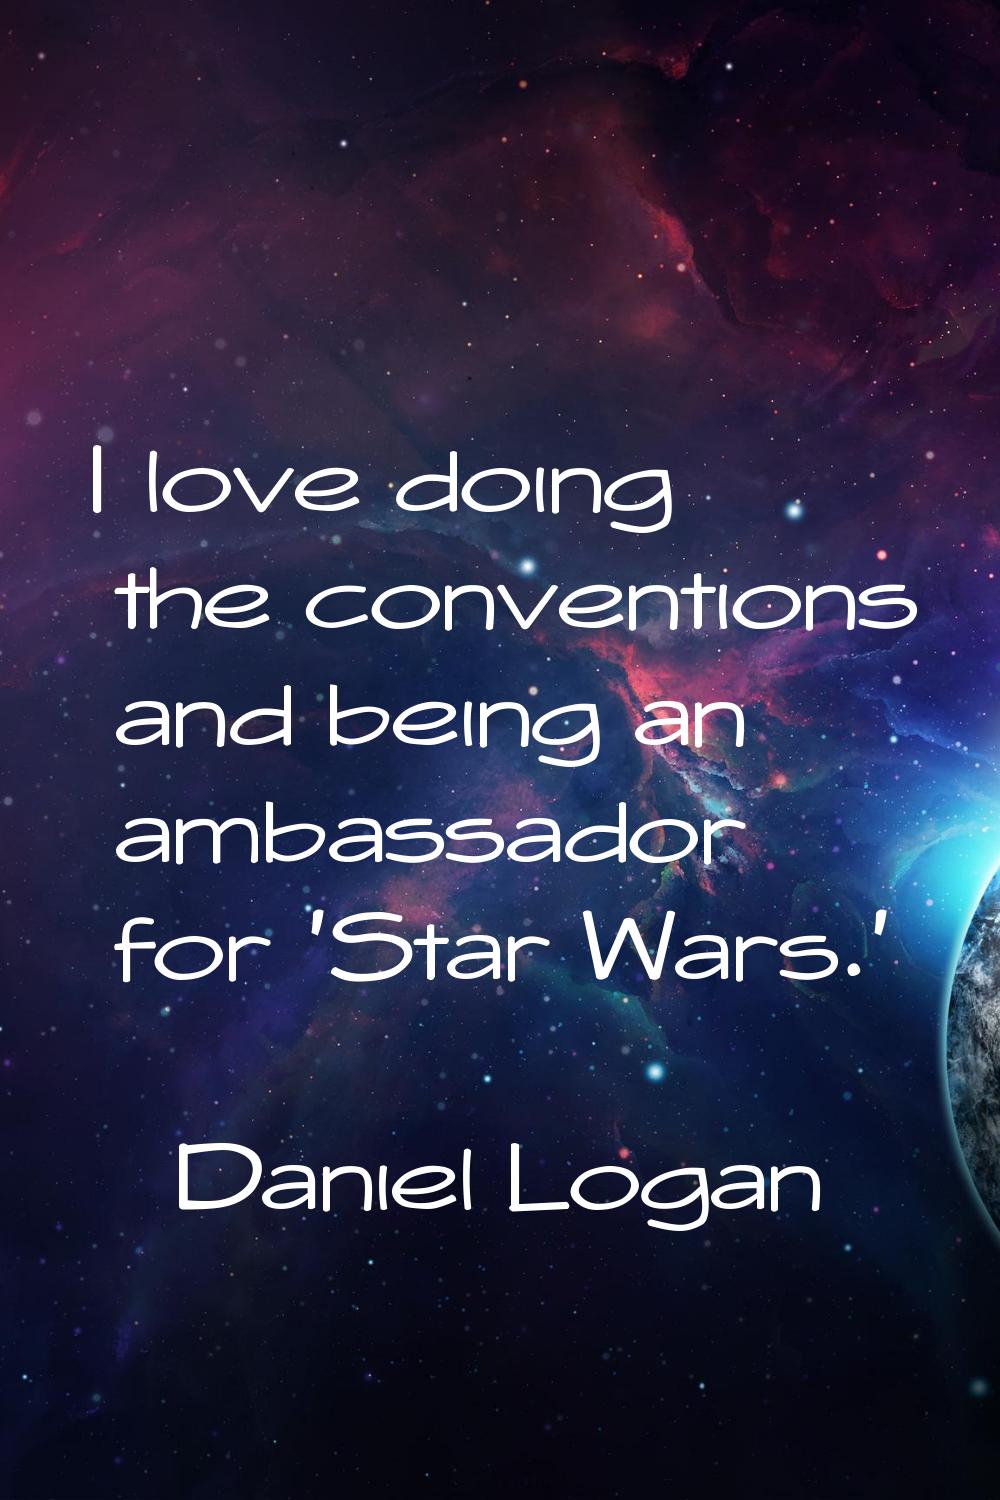 I love doing the conventions and being an ambassador for 'Star Wars.'